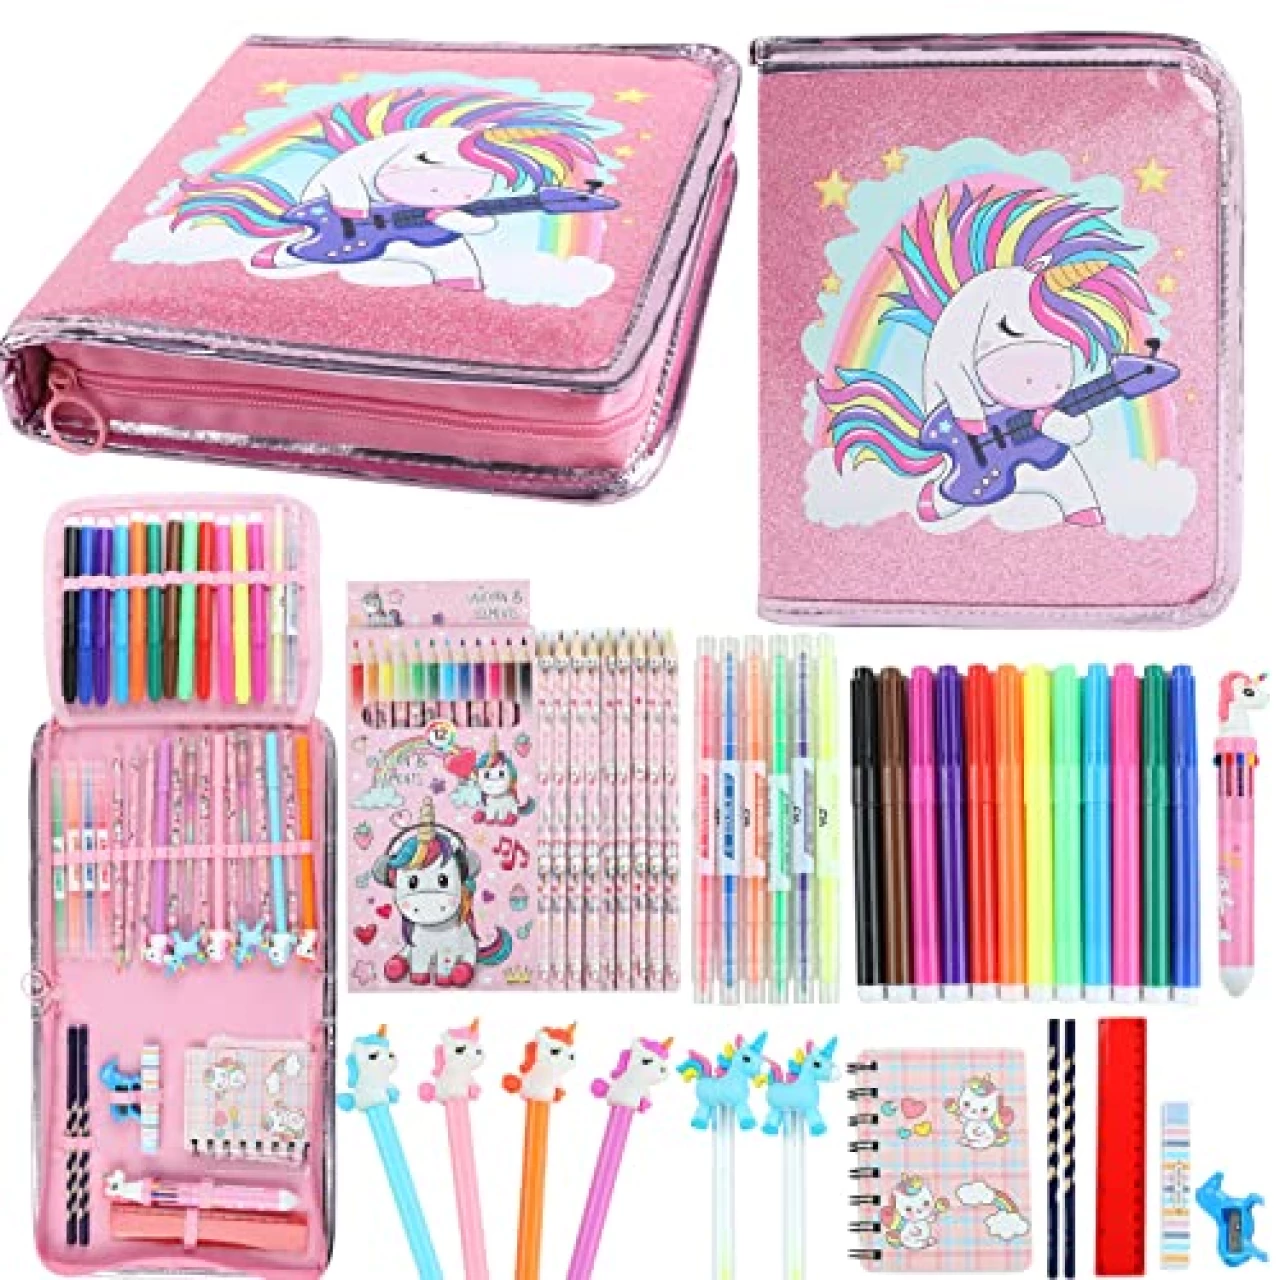 Fruit Scented Markers Set 44 Pcs Filled Stationery with Unicorn Pencil Case,Art Supplies for Kids Ages 4-6-8, Perfect Unicorn Gifts For Girls,Assortment Marker Pencil Gel Pen Coloring